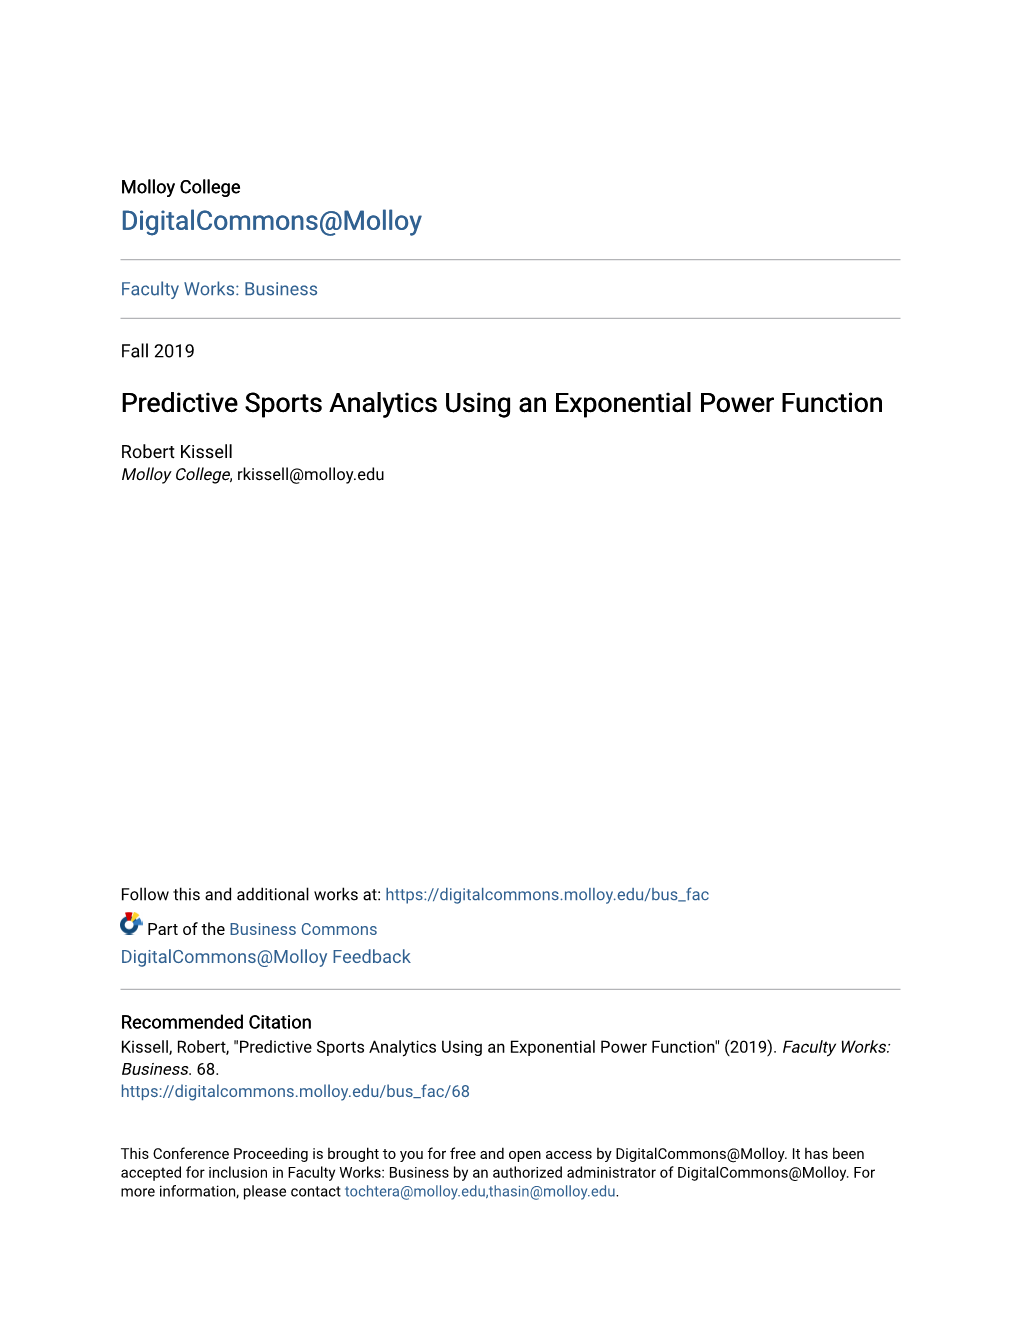 Predictive Sports Analytics Using an Exponential Power Function